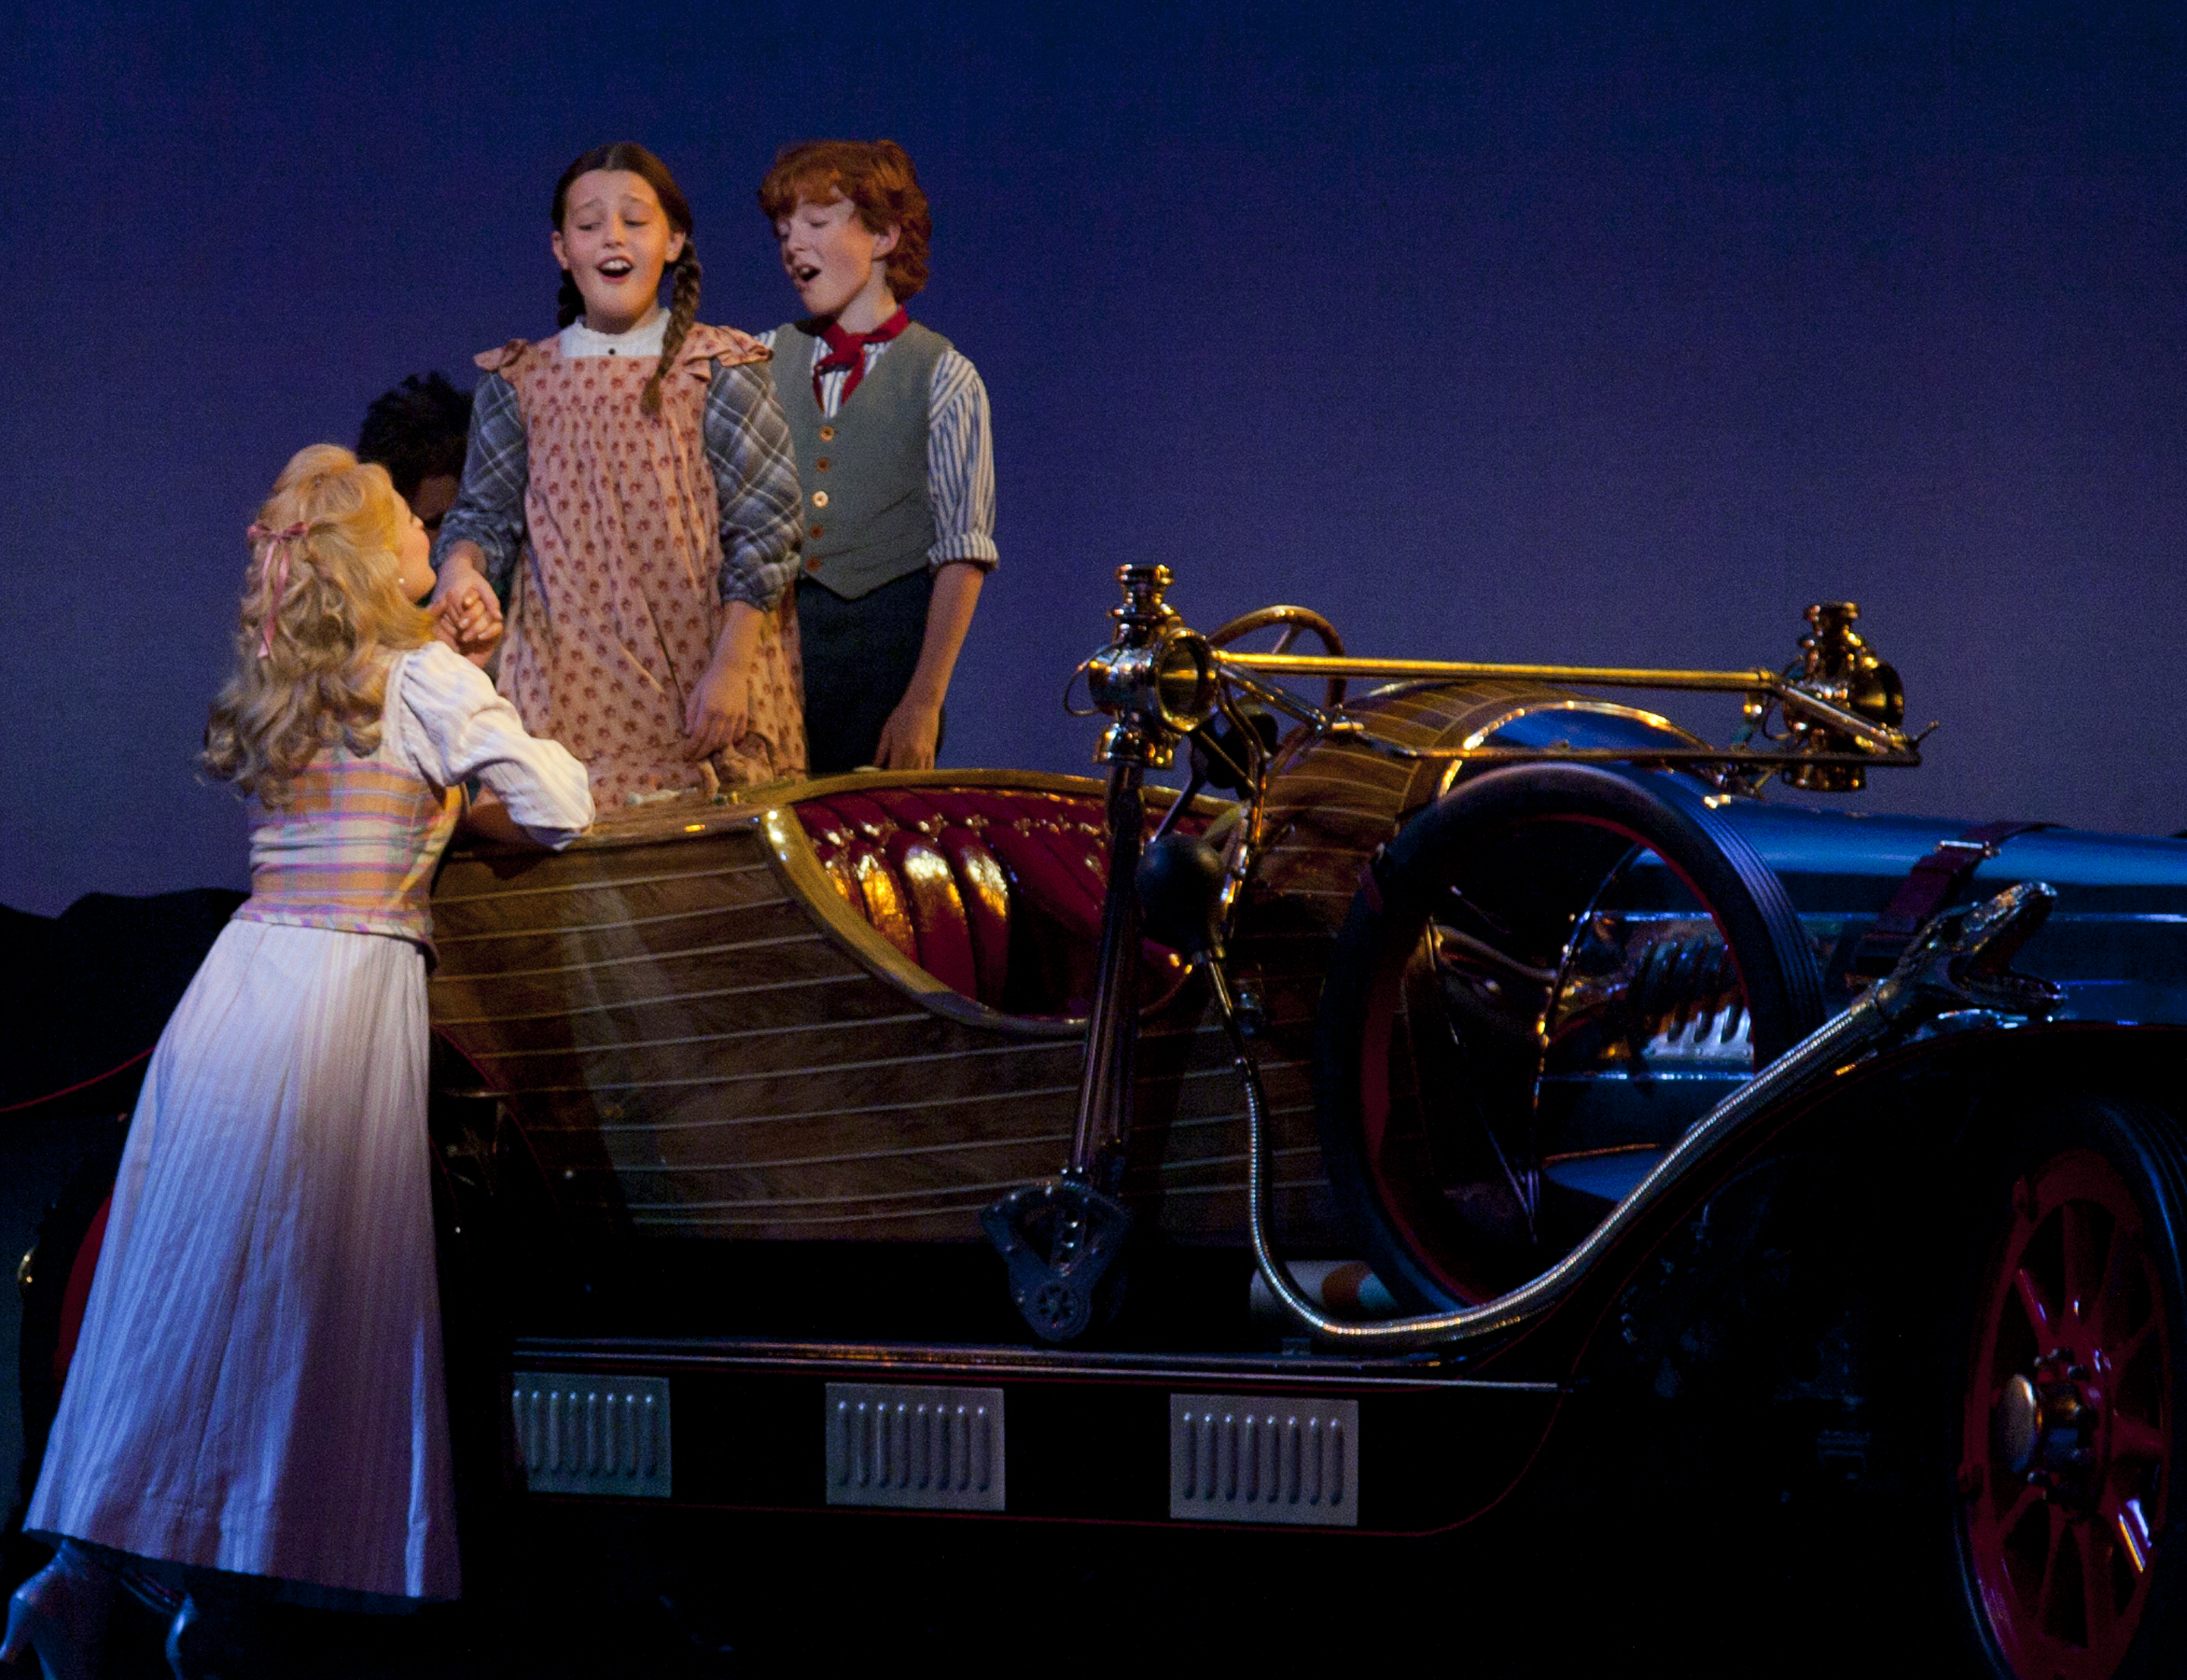 Sophie as the lead role of Jemima in Chitty Chitty Bang Bang at QPAC 2013. Here with Rachel Beck (Truly Scrumptious) and Campbell MacCorquodale (Jeremy)